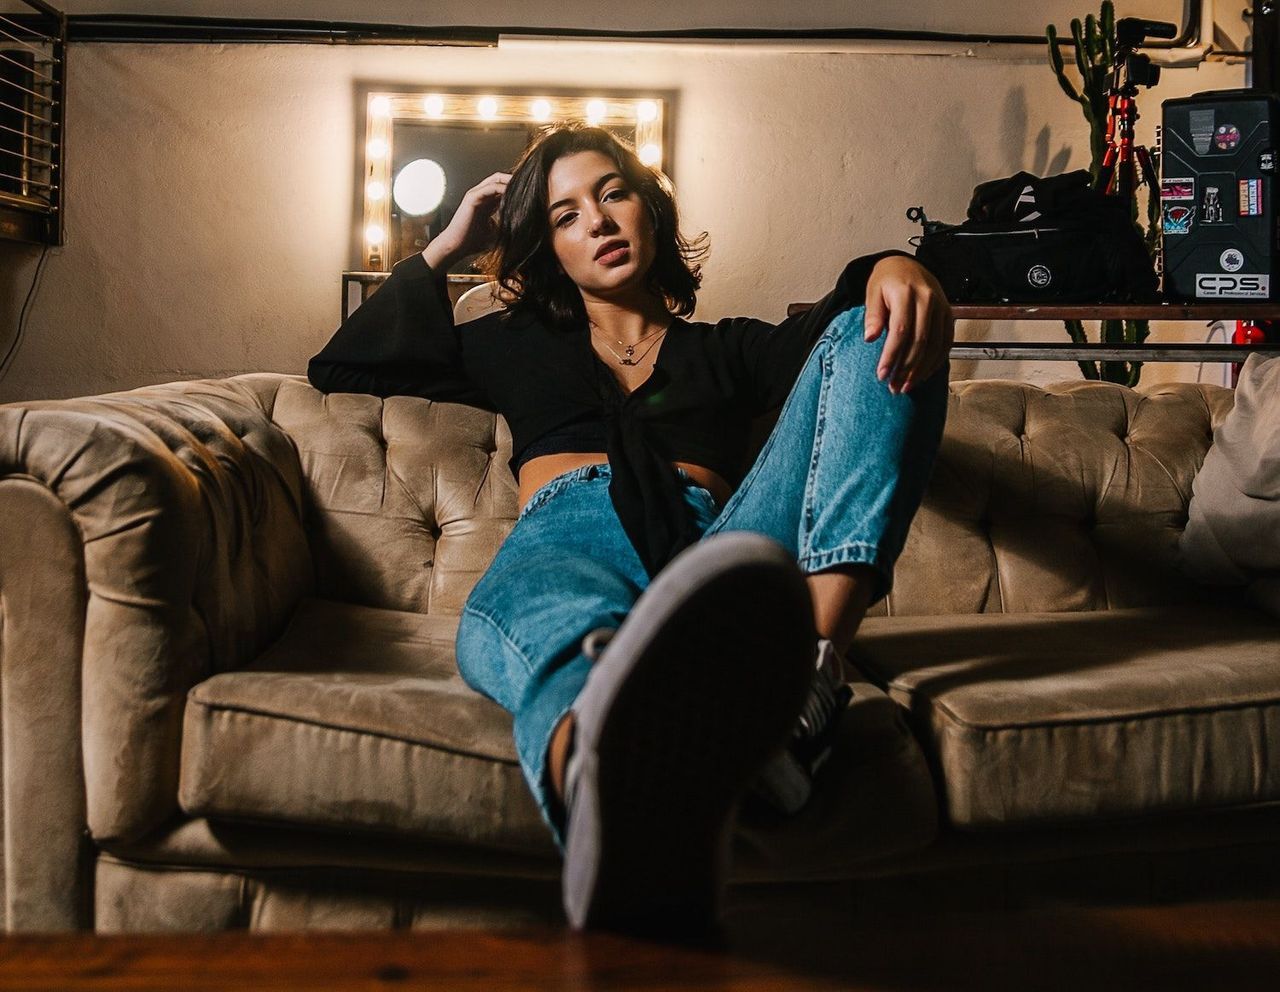 Woman chilling on a leather couch